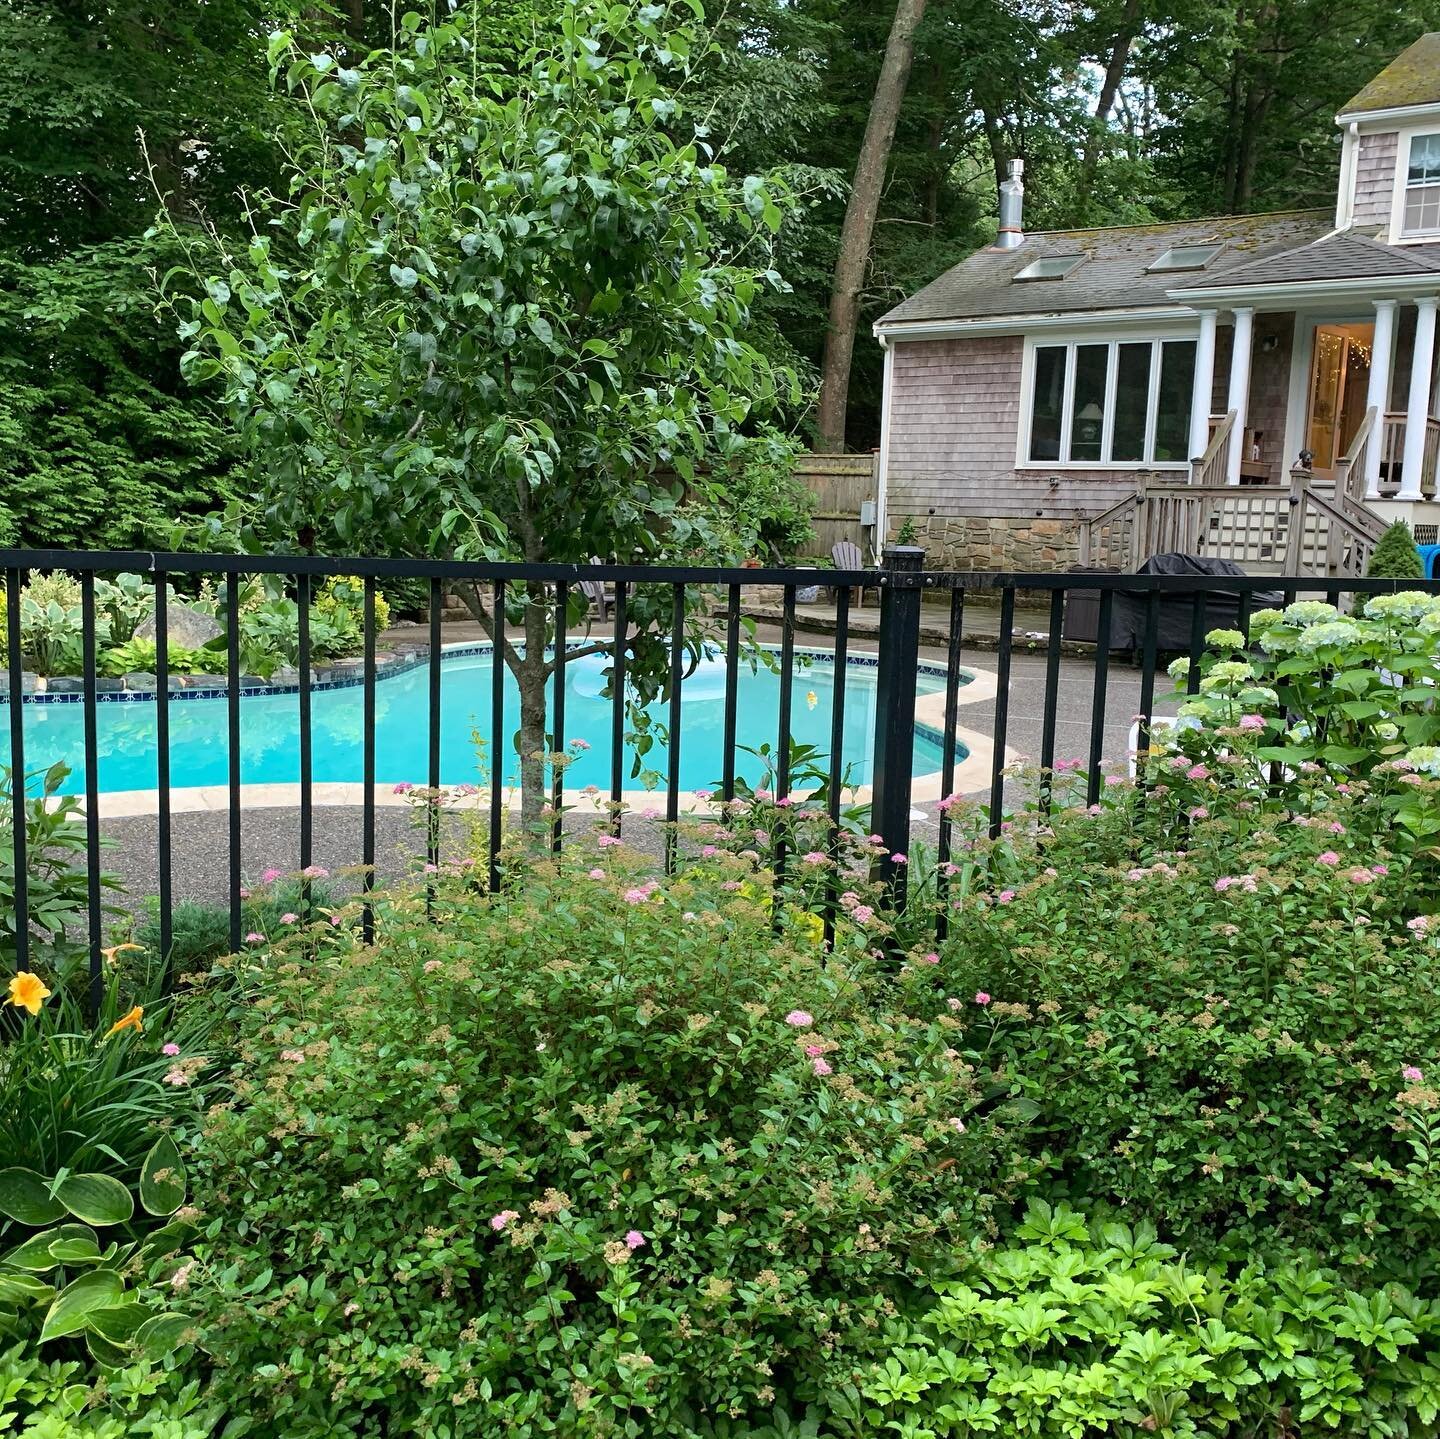 Enjoy entertaining poolside at this gorgeous outdoor oasis at 58 Captain Vinal Way in Norwell. Beautiful 4BR Colonial in a sought after neighborhood. Will be hitting the market in a few weeks...more details to come.